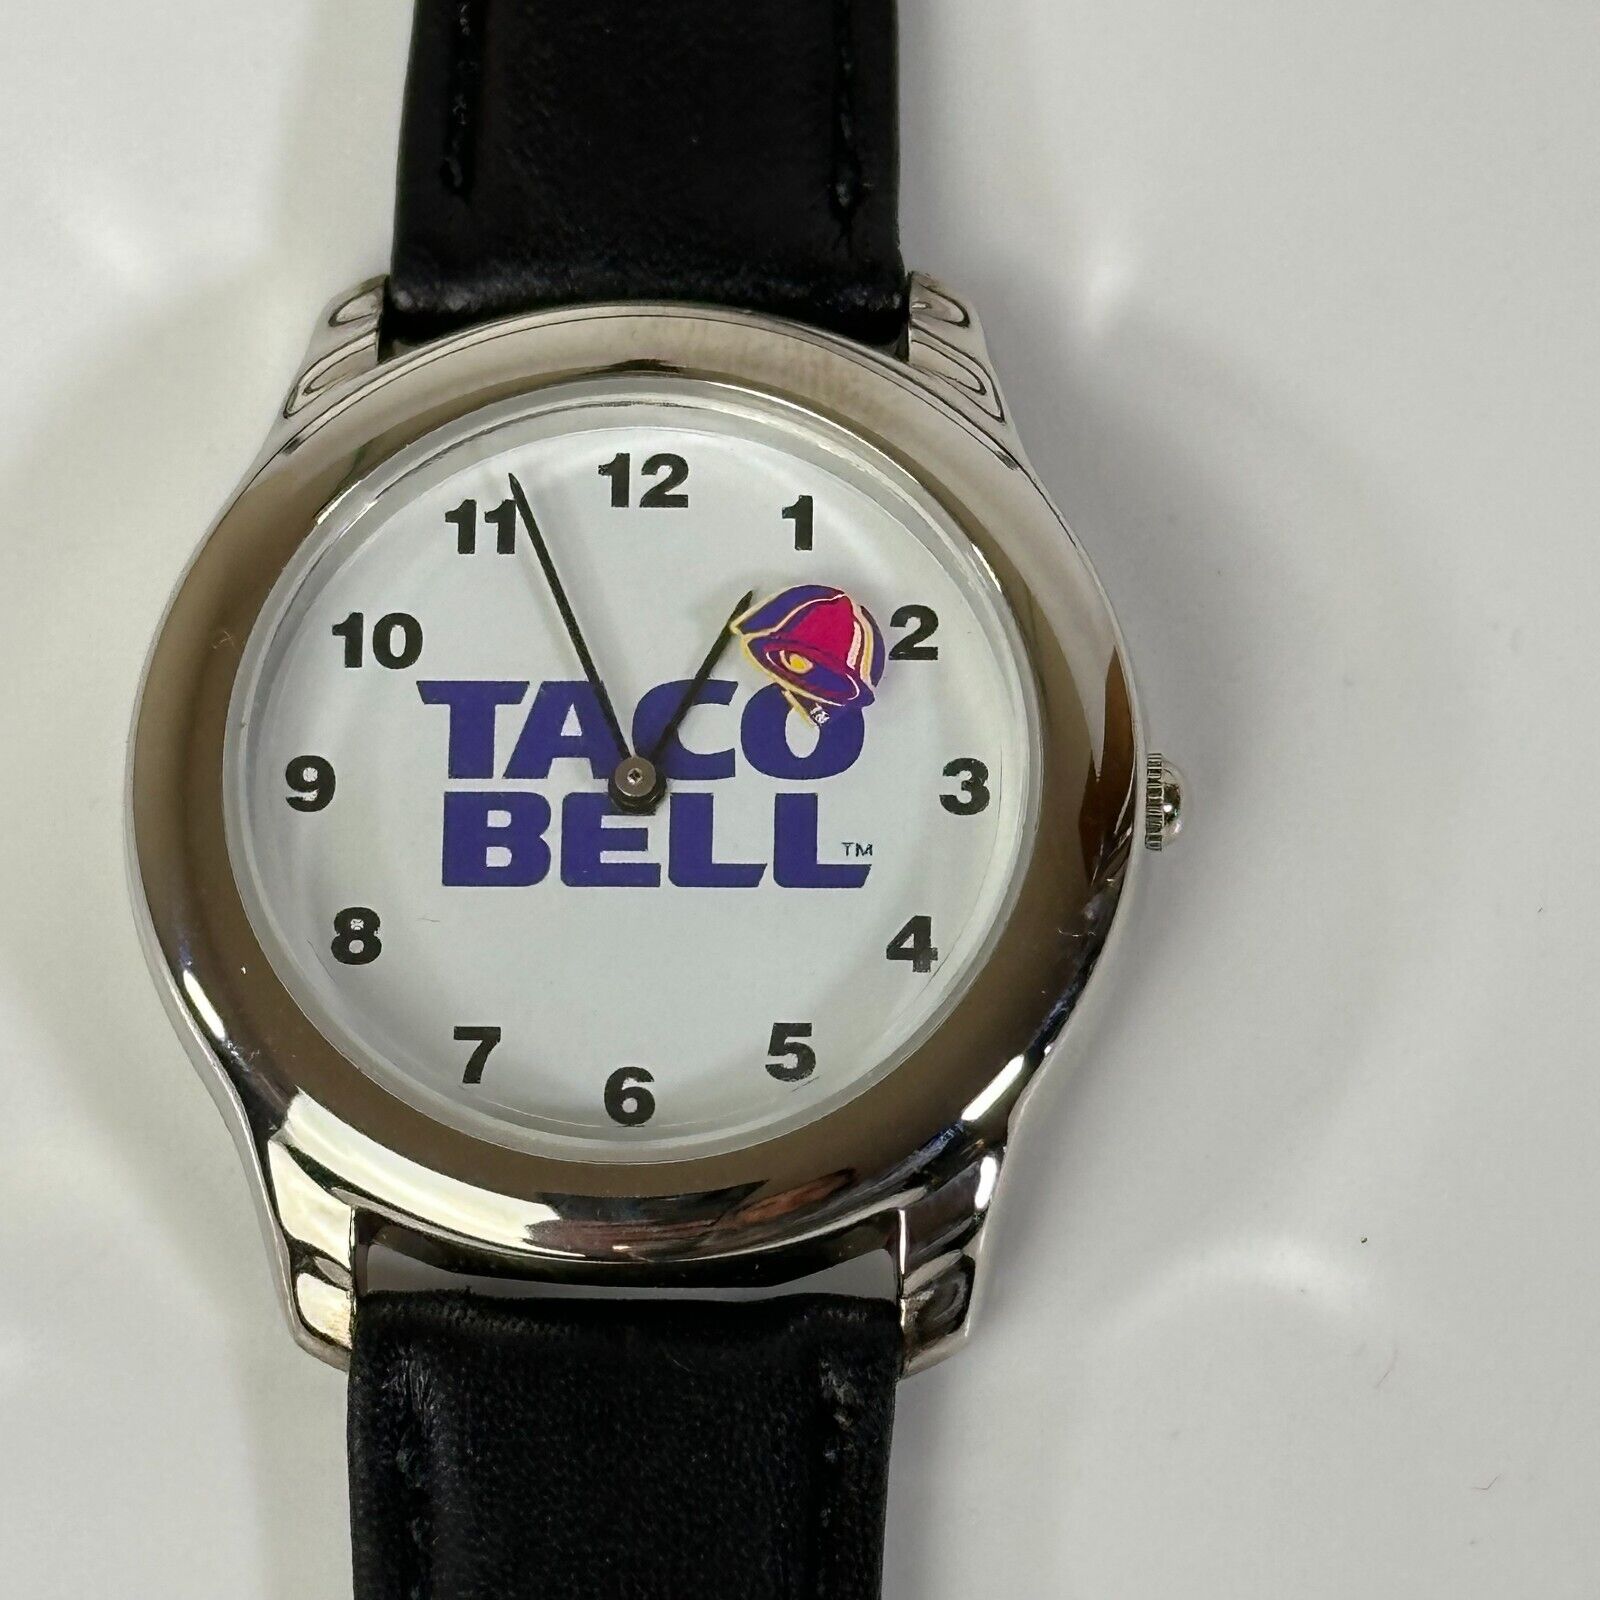 Vintage Taco Bell Watch Second Hand Floating Taco Service Leather Wrist Watch